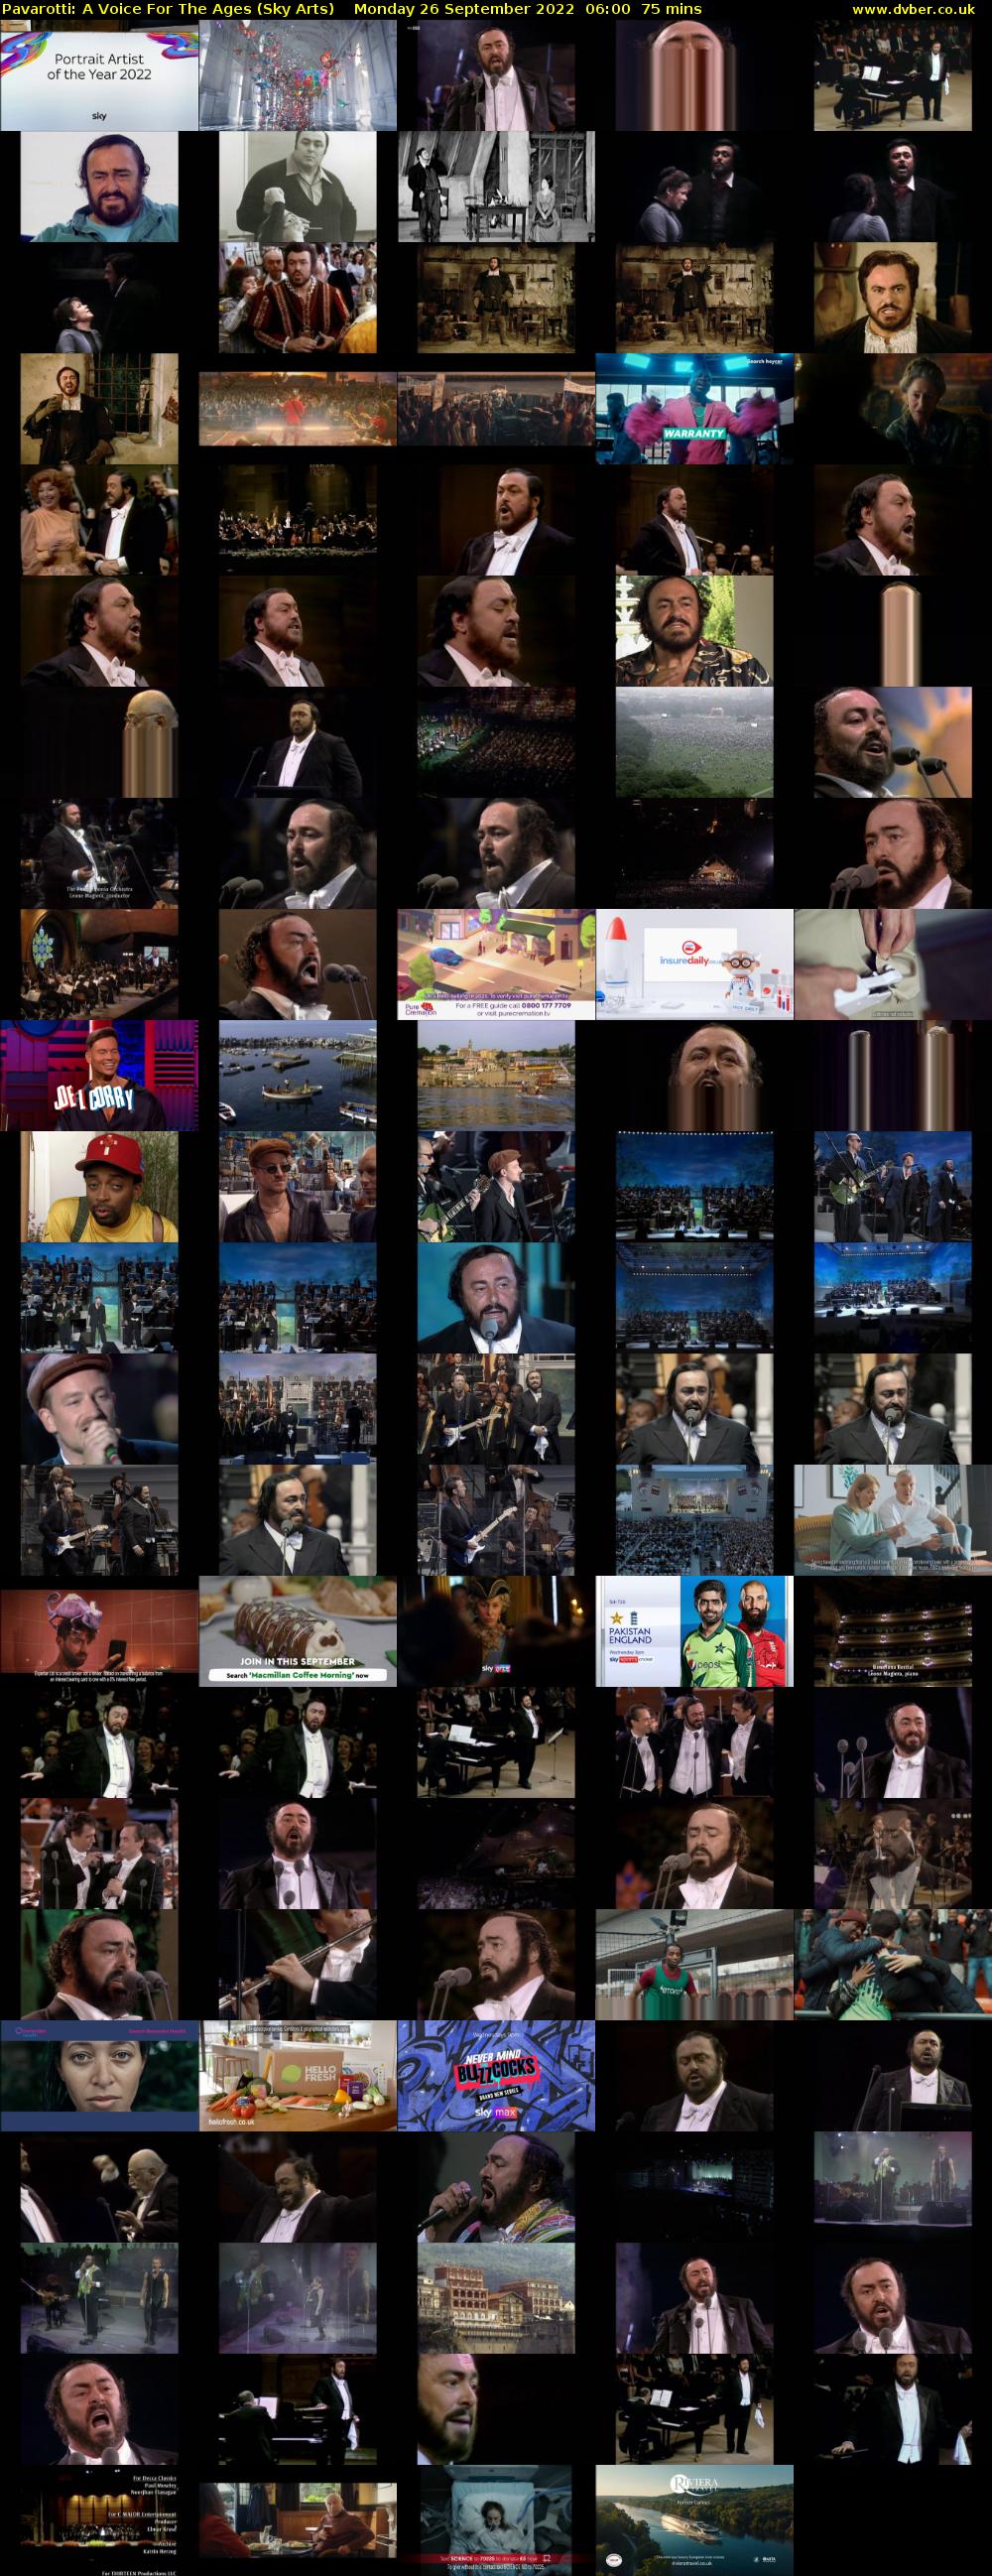 Pavarotti: A Voice For The Ages (Sky Arts) Monday 26 September 2022 06:00 - 07:15